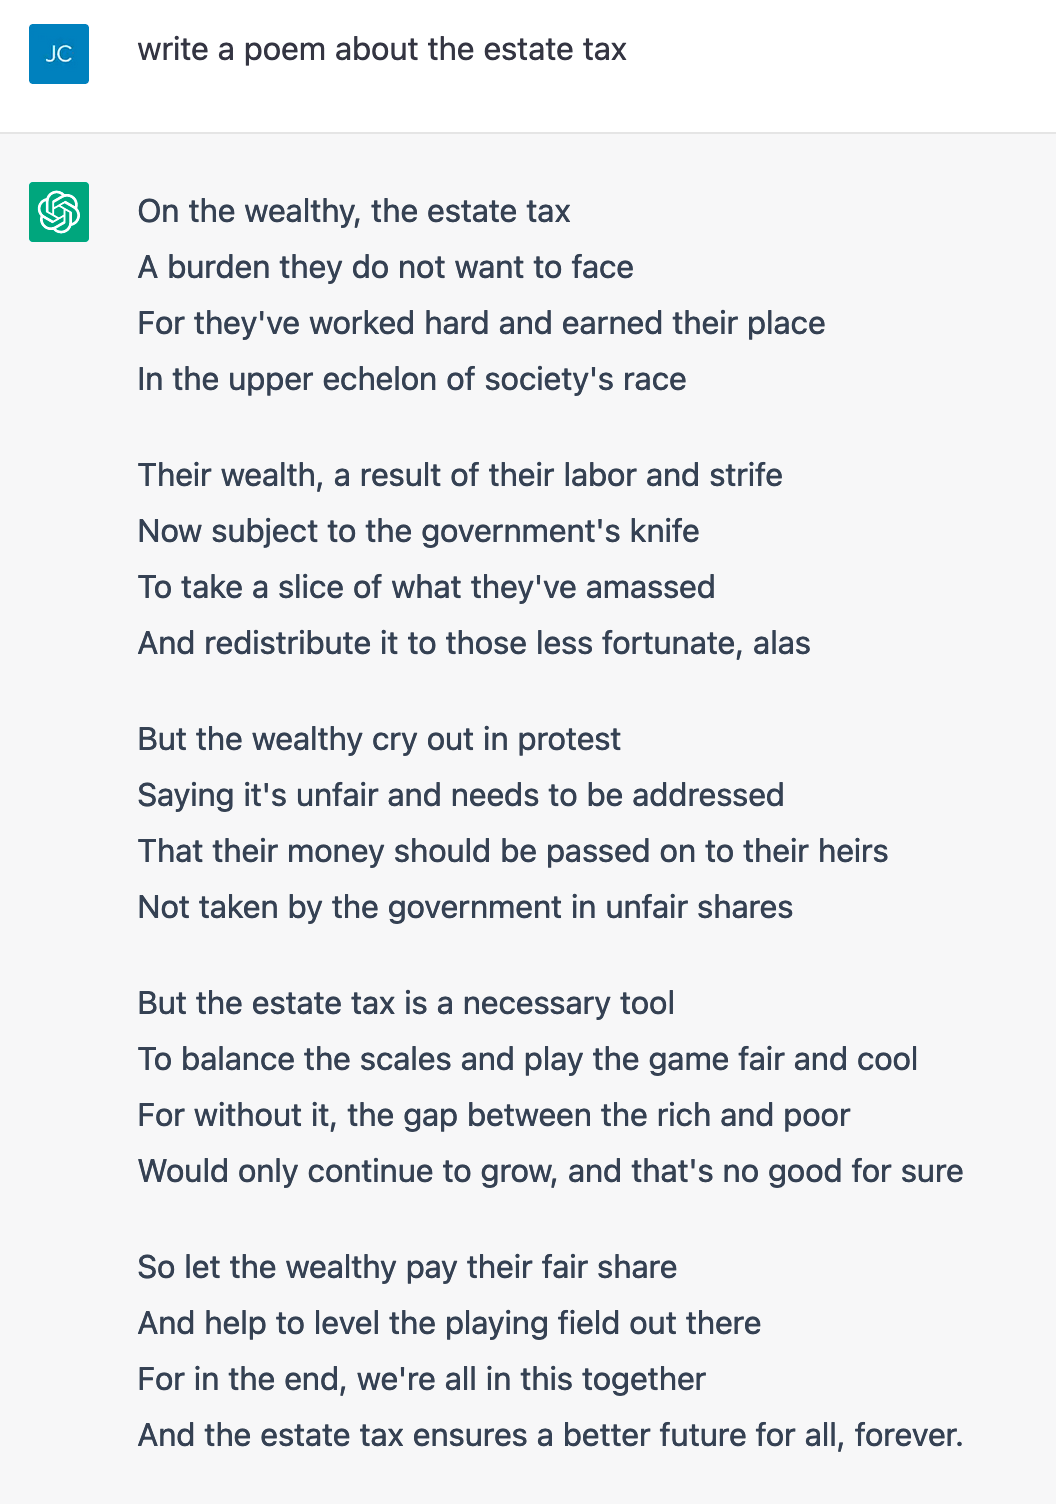 ChatGPT screenshot. JC: "write a poem about the estate tax" ChatGPT: a five stanza poem ending "So let the wealthy pay their fair share / And help to level the playing field out there / For in the end, we're all in this together / And the estate tax ensures a better future for all. forever."